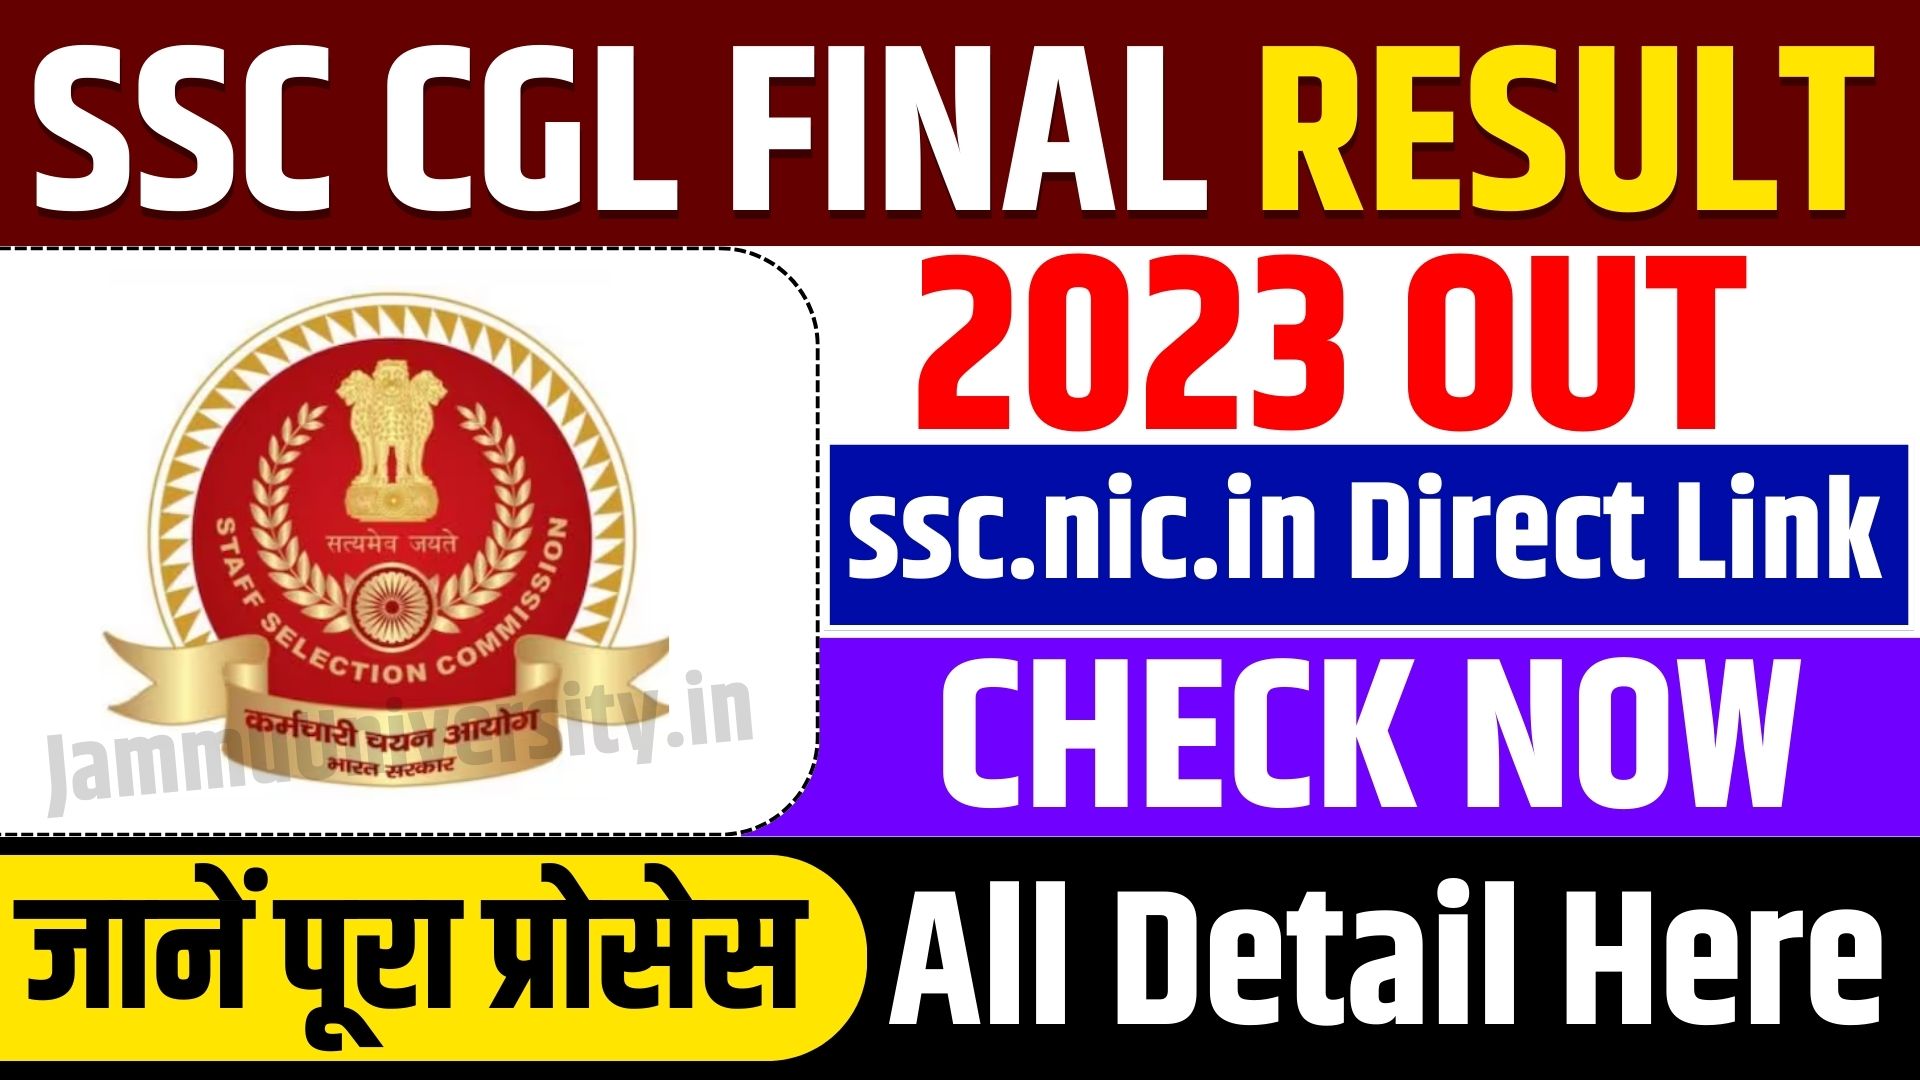 SSC CGL 2023 Final Result, ssc.nic.in Results